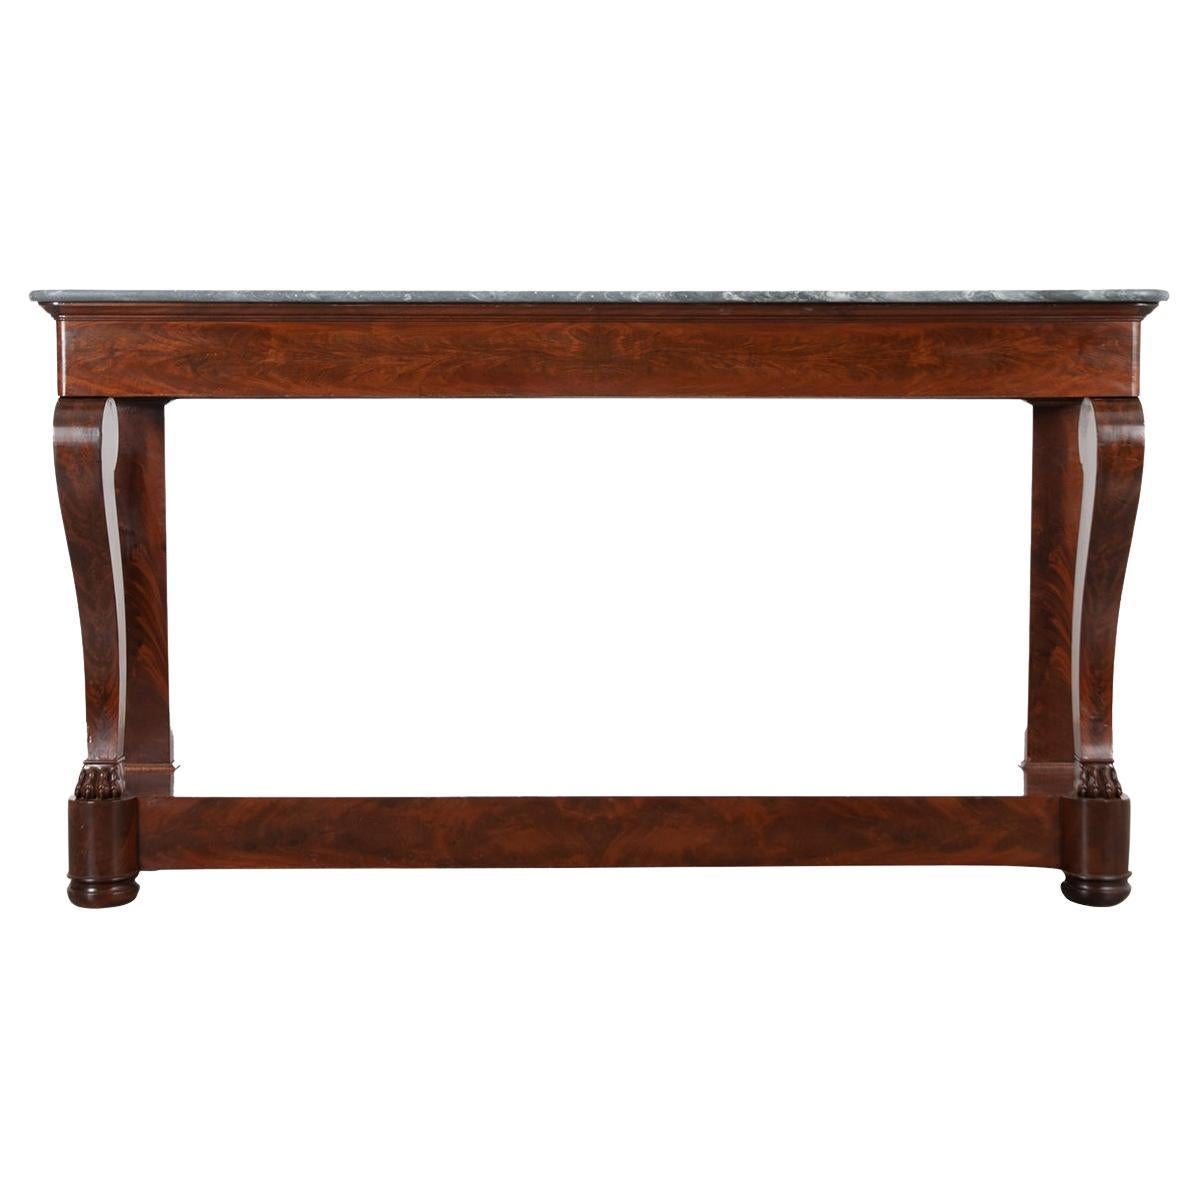 French Massive Mahogany Restauration Console For Sale